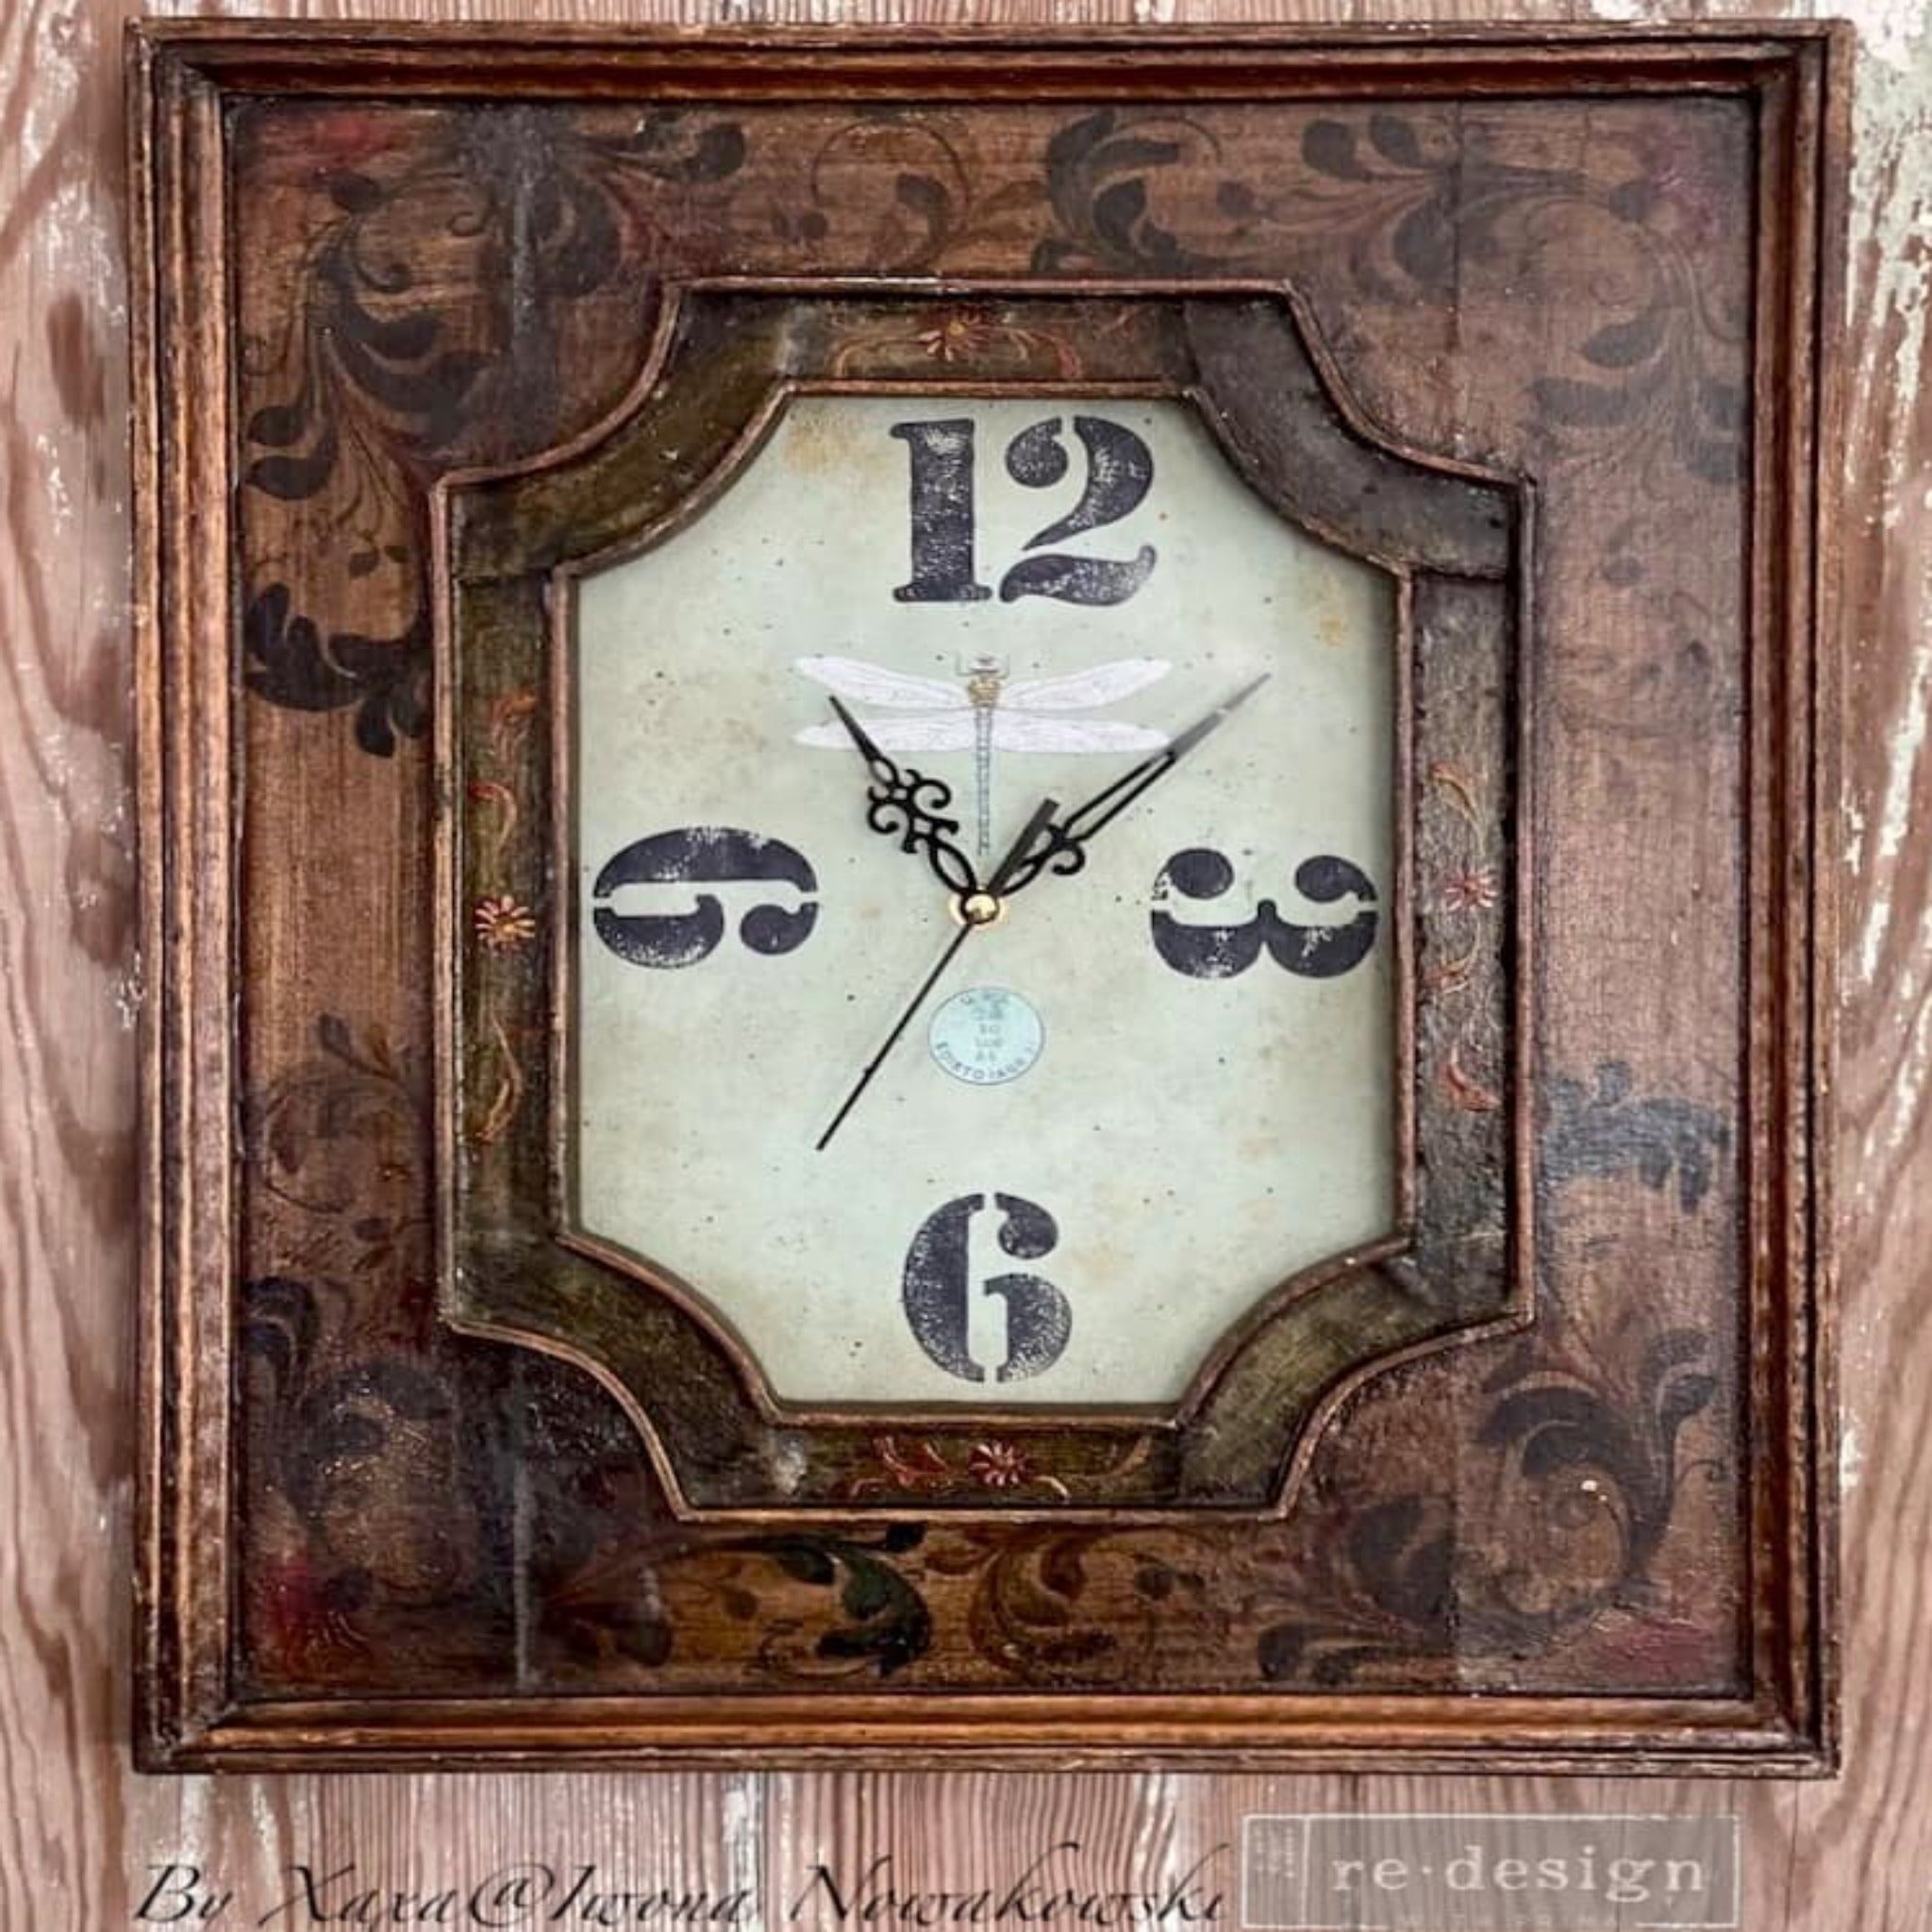 A vintage wood picture frame turned into a clock refurbished by Iwona Nowakowski and features ReDesign with Prima's Spring Dragonfly small transfer inside the glass in the middle of the 4 large 12, 3, 6, and 9 hour numbers.